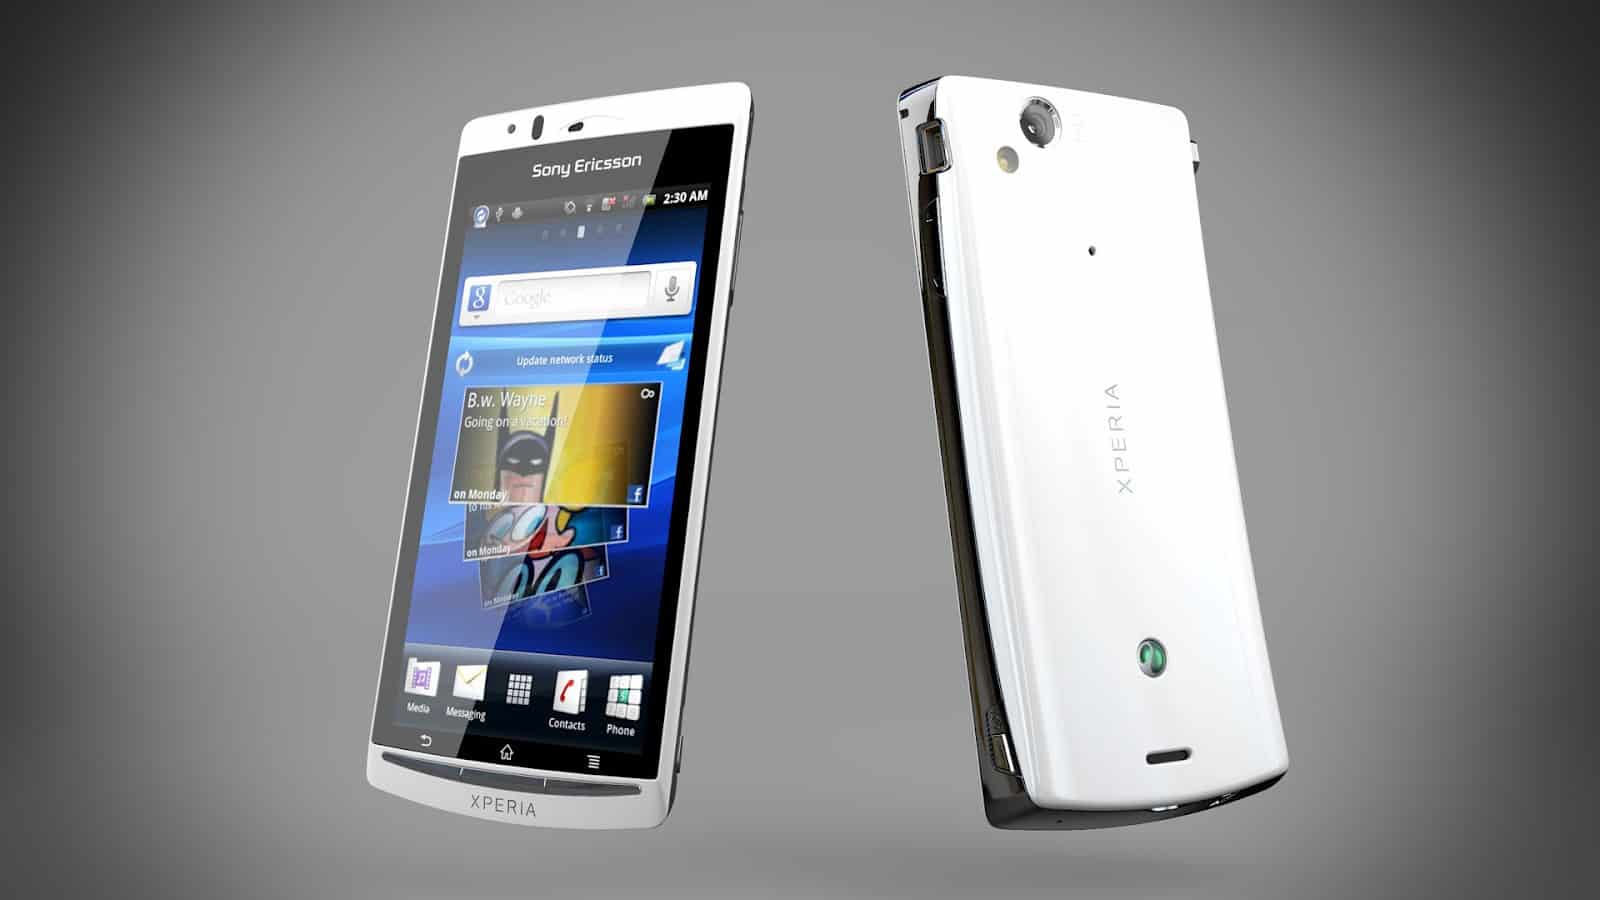 Sony ericsson xperia arc s file manager download